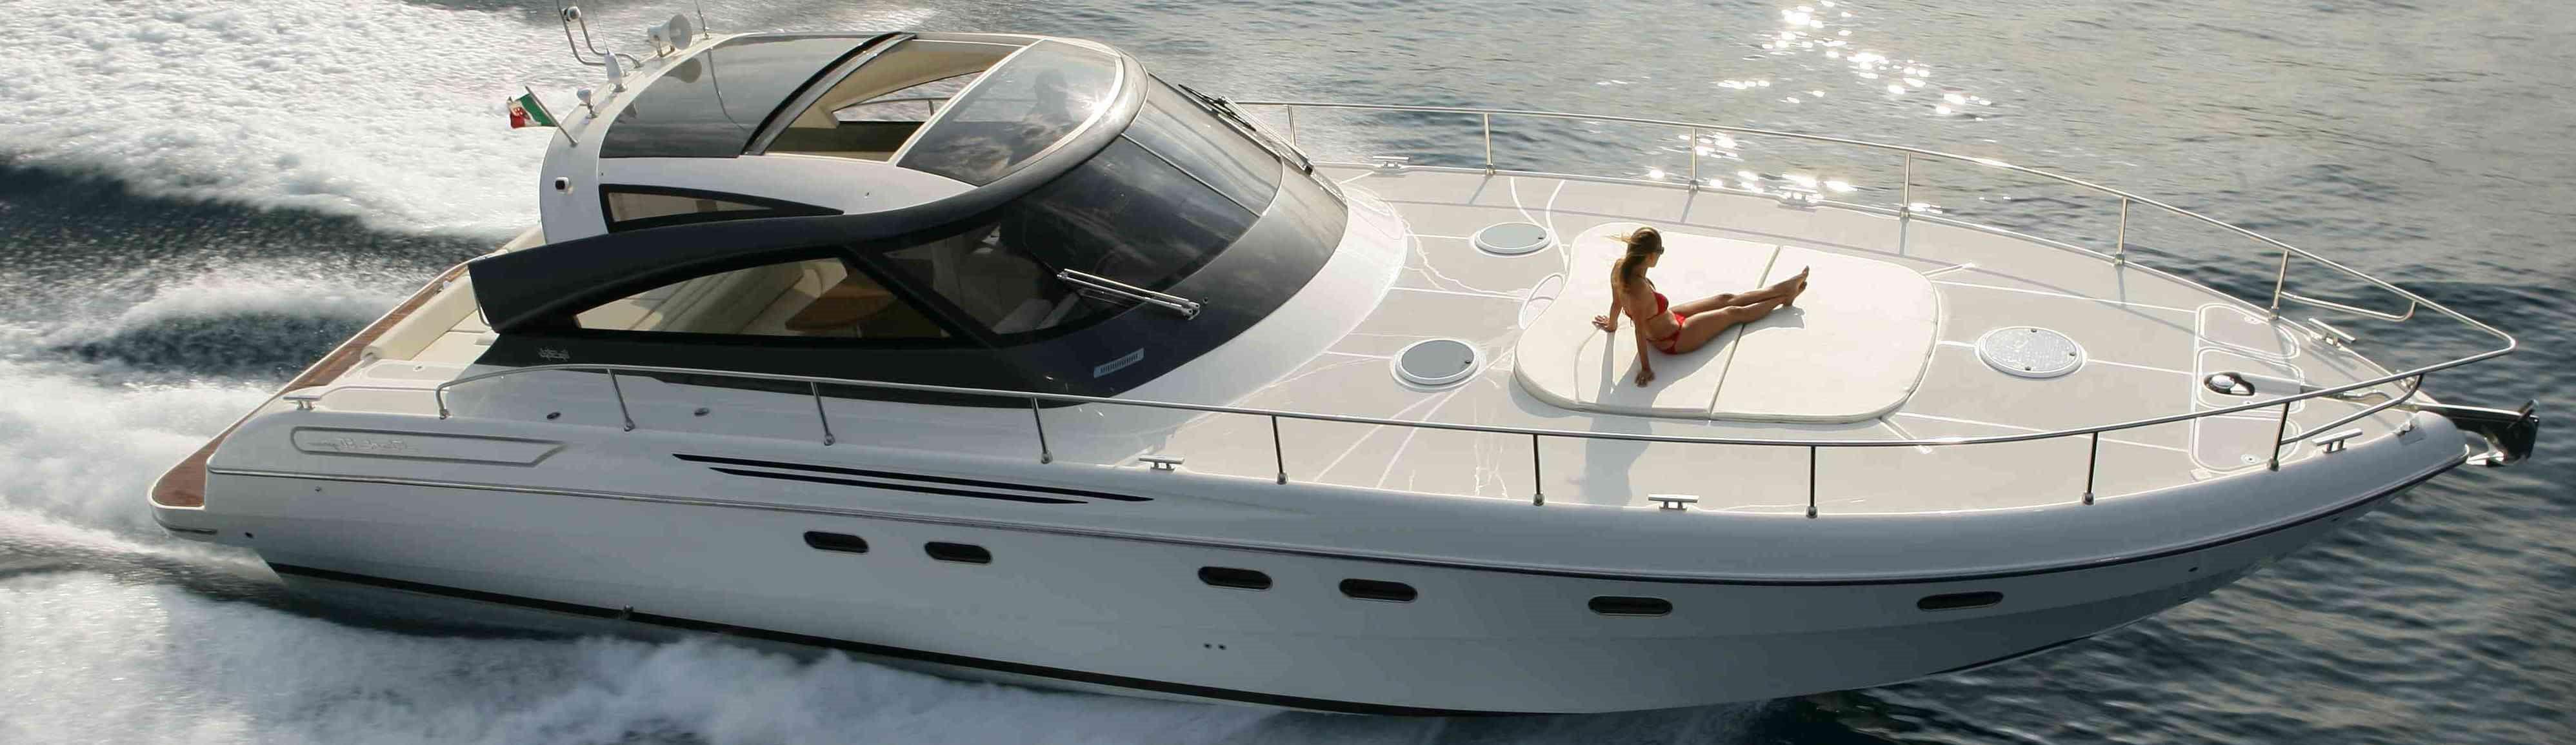 2007 Fiart Mare 50 TOP STYLE